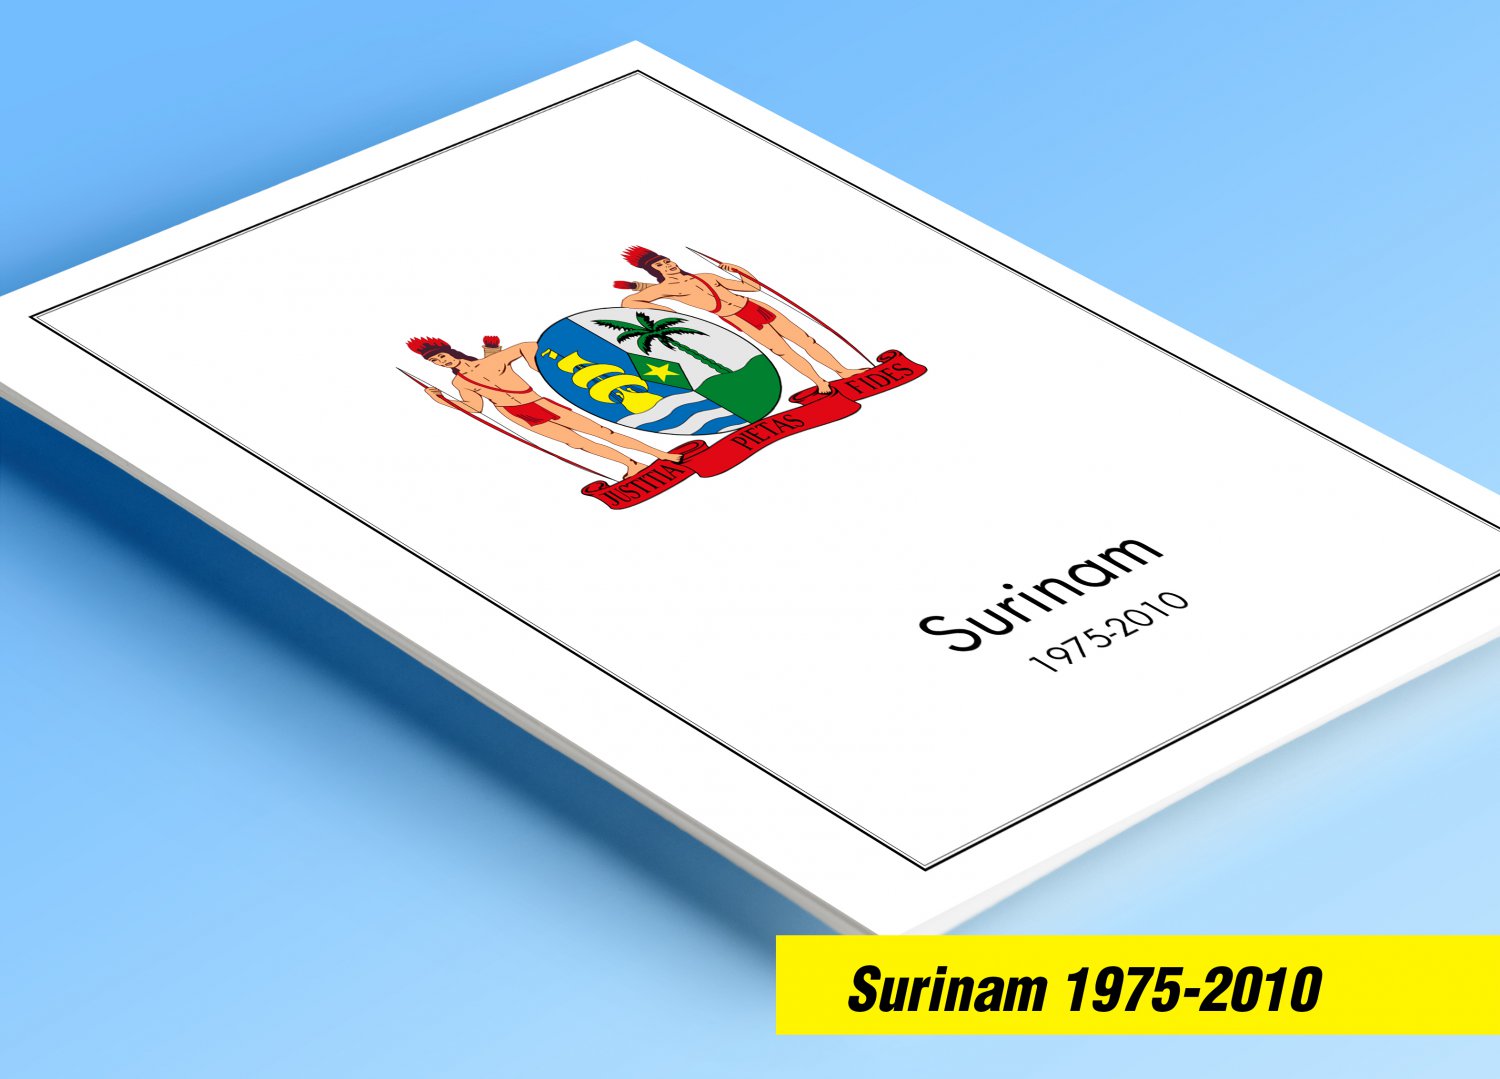 COLOR PRINTED SURINAM [REPUBLIC] 1975-2010 STAMP ALBUM PAGES (197 illustrated pages)